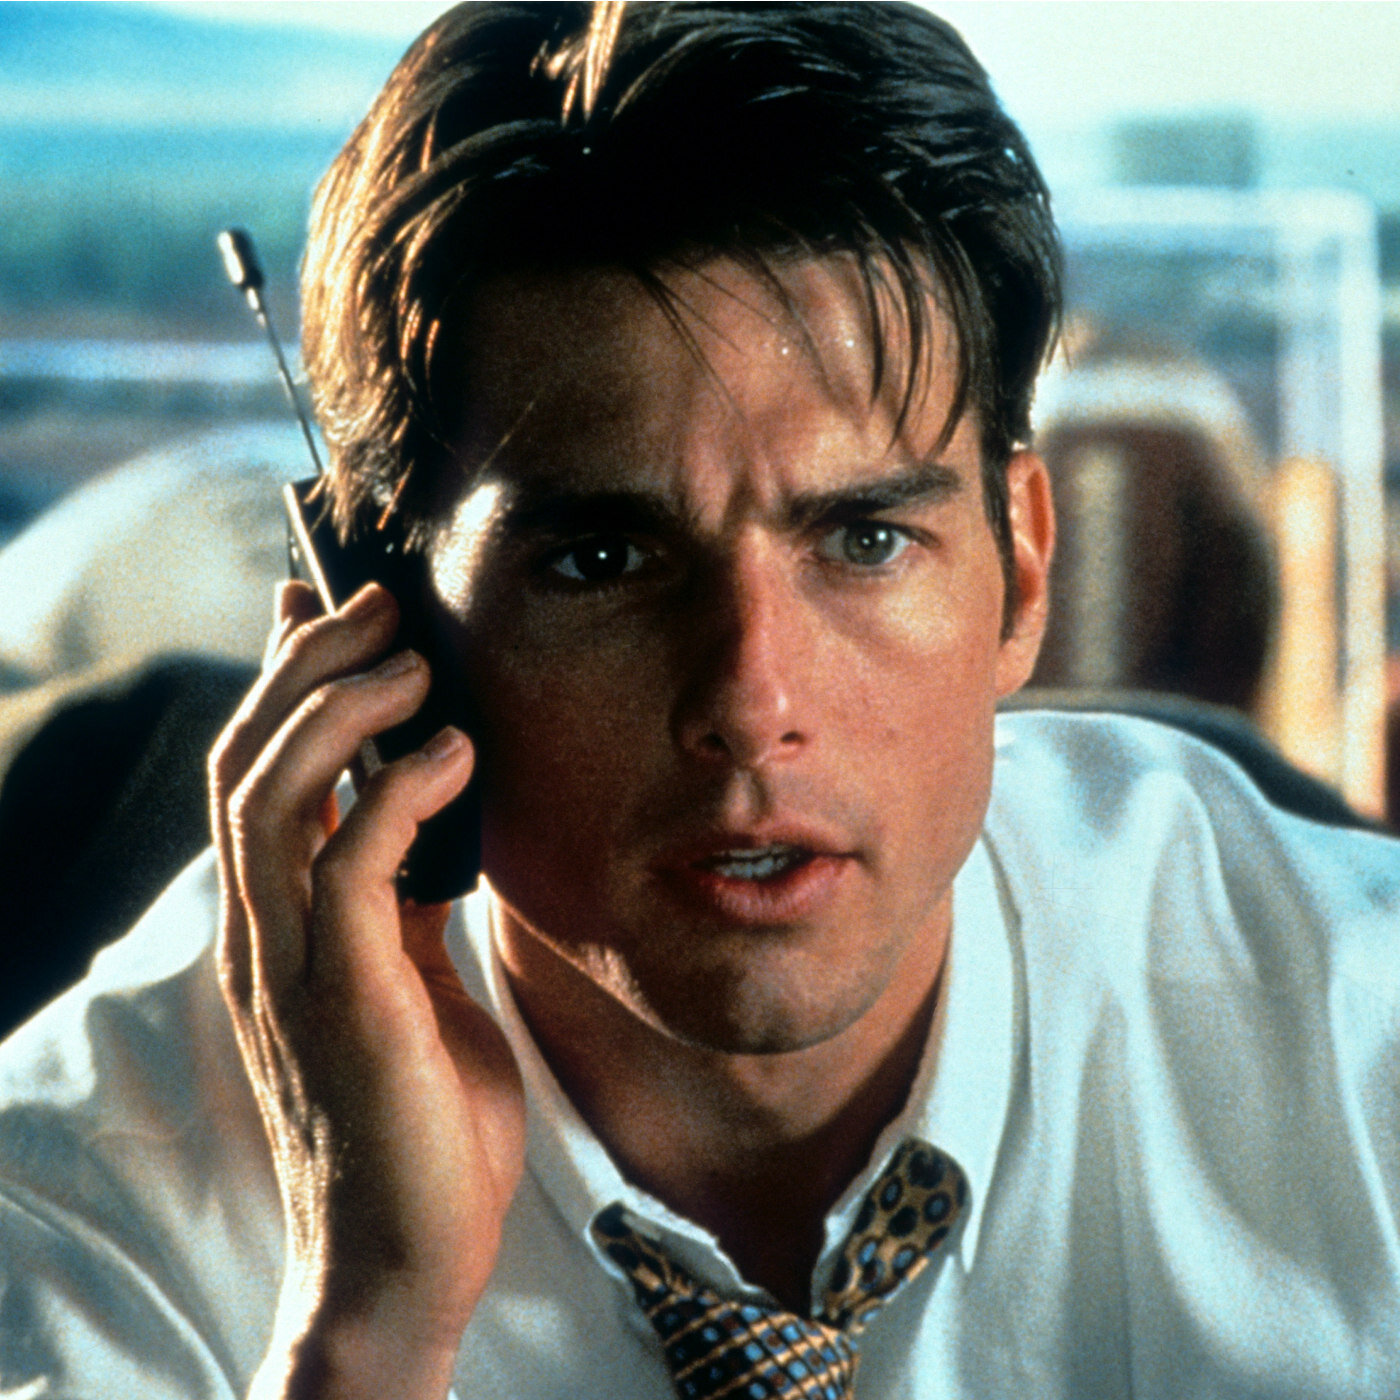 Jerry_Maguire_SQ.jpg